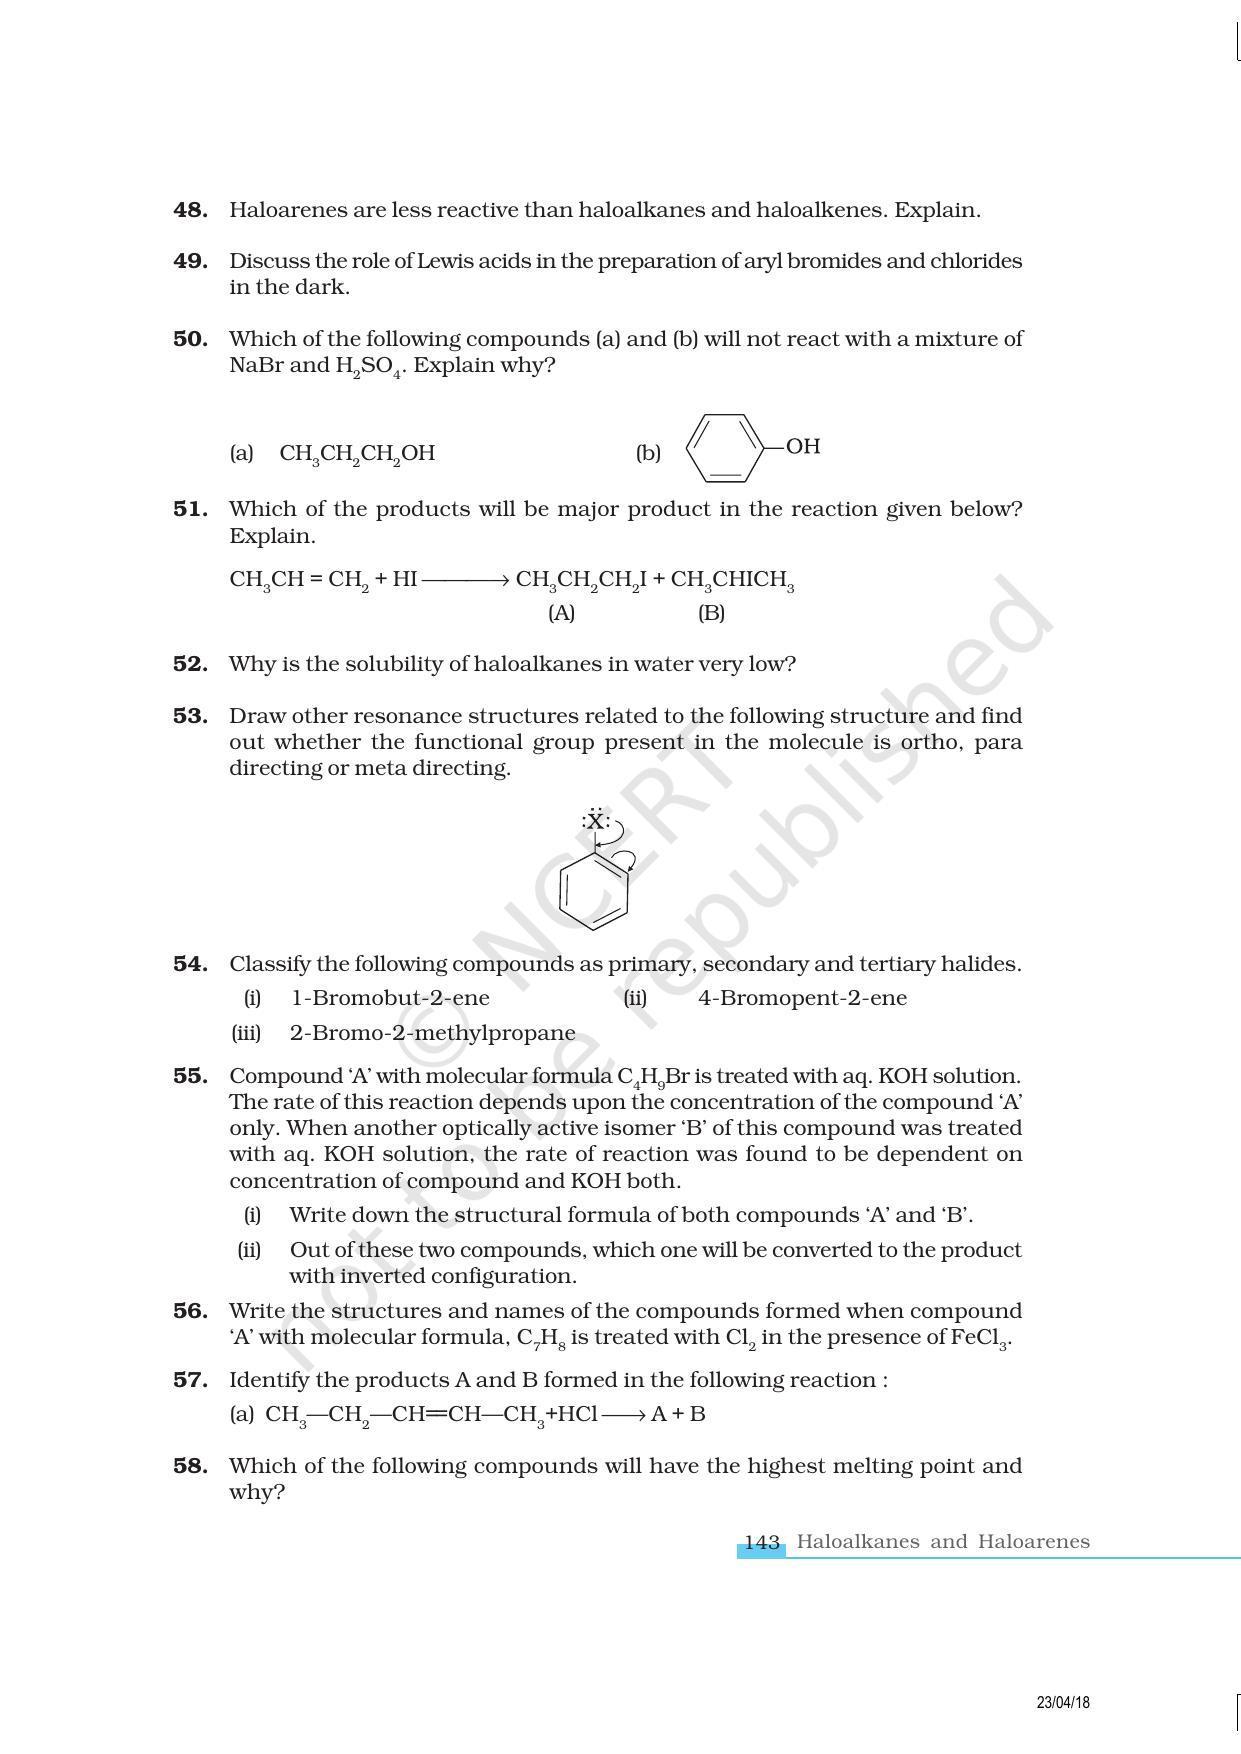 NCERT Exemplar Book for Class 12 Chemistry: Chapter 10 Haloalkanes and Haloarenes - Page 11